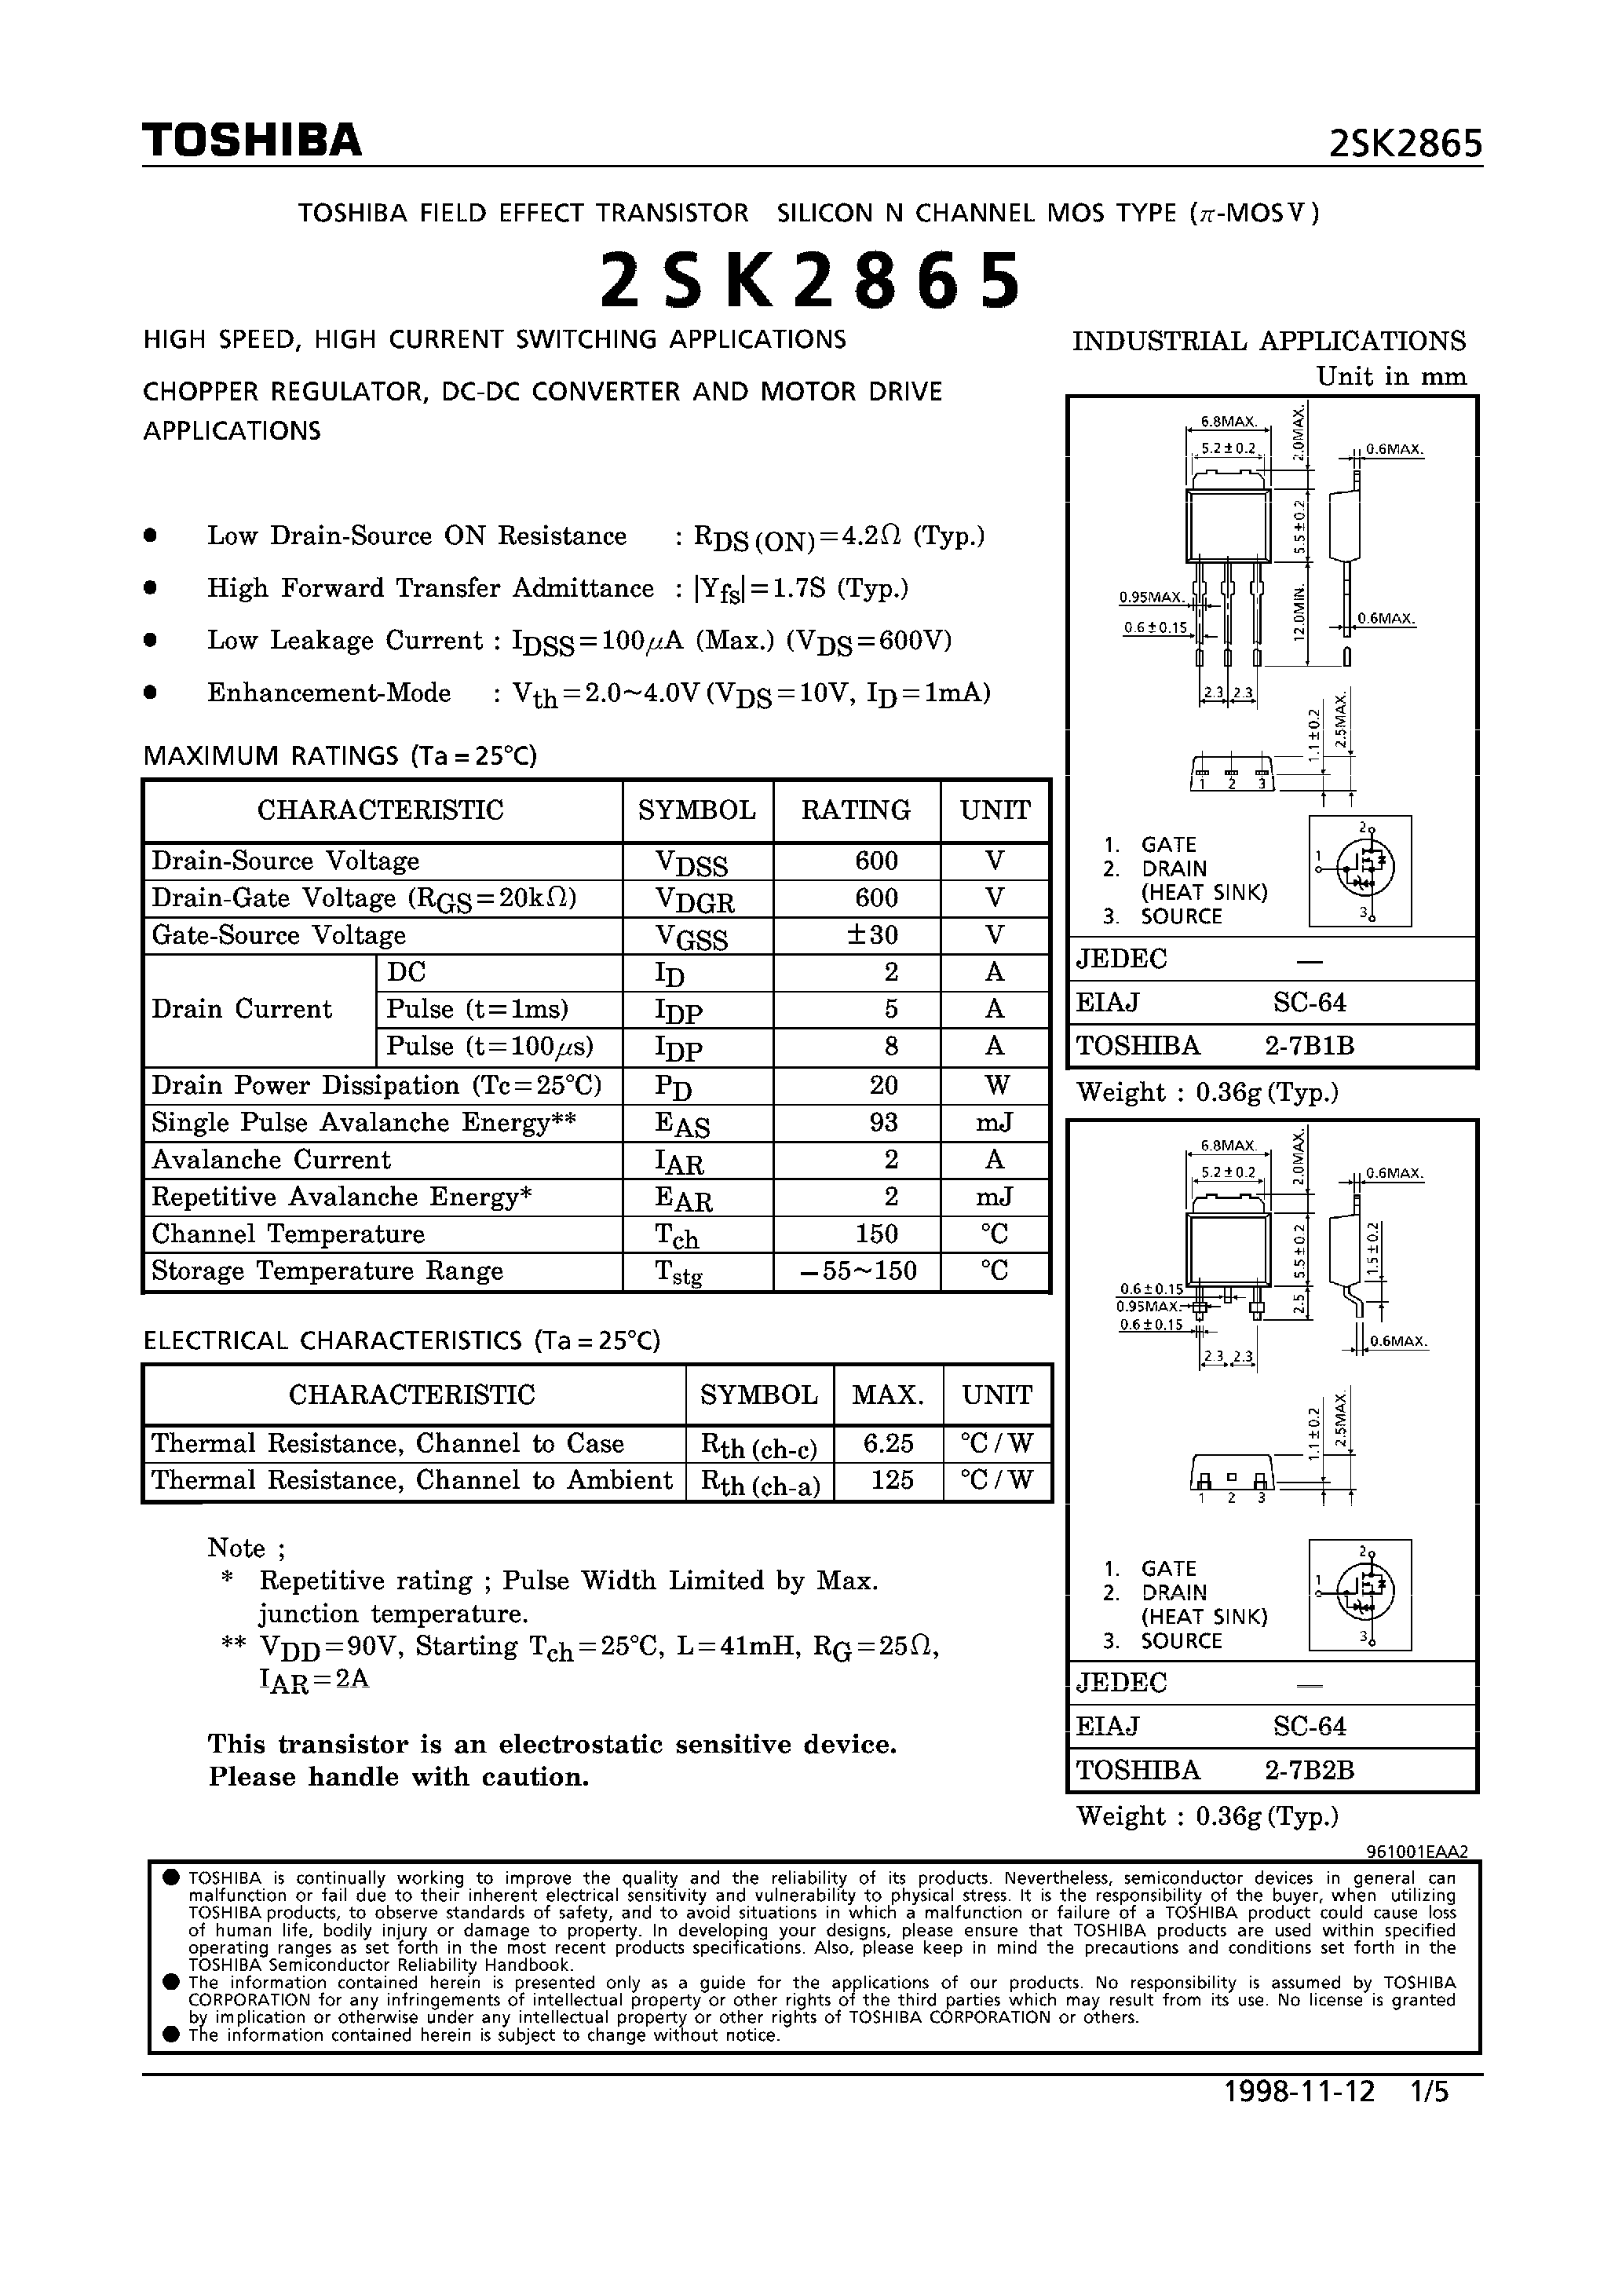 Datasheet 2SK2865 - N CHANNEL MOS TYPE (HIGH SPEED/ HIGH CURRENT SWITCHING/ CHOPPER REGULATOR/ DC-DC CONVERTERAND MOTOR DRIVE APPLICATIONS) page 1